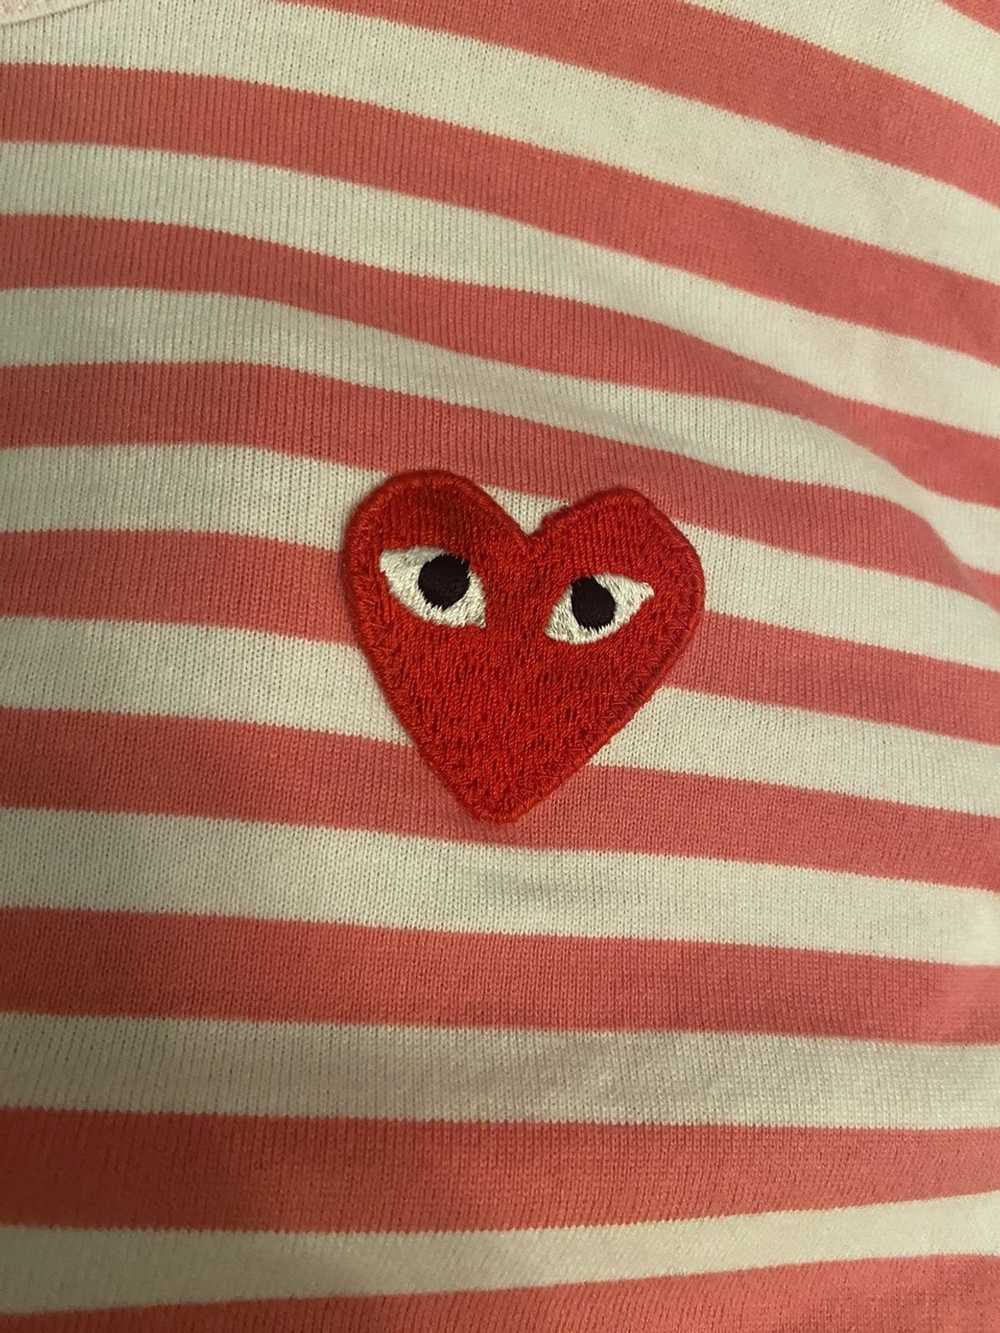 Comme des Garcons Cdg Striped heart logo tee - image 5